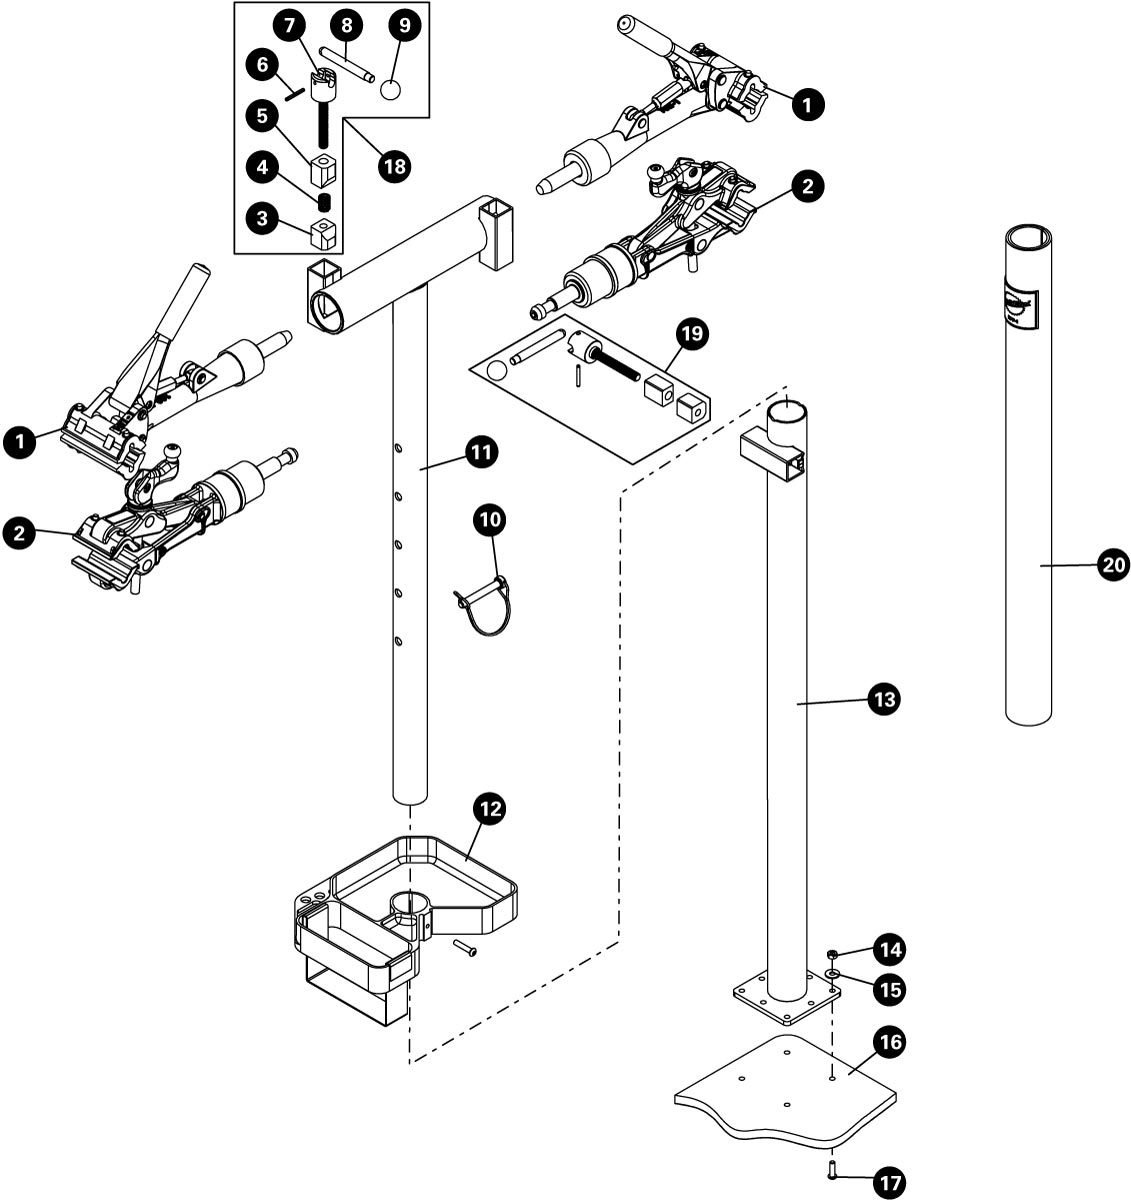 Parts diagram for PRS-2.3-1 Deluxe Double Arm Repair Stand, enlarged